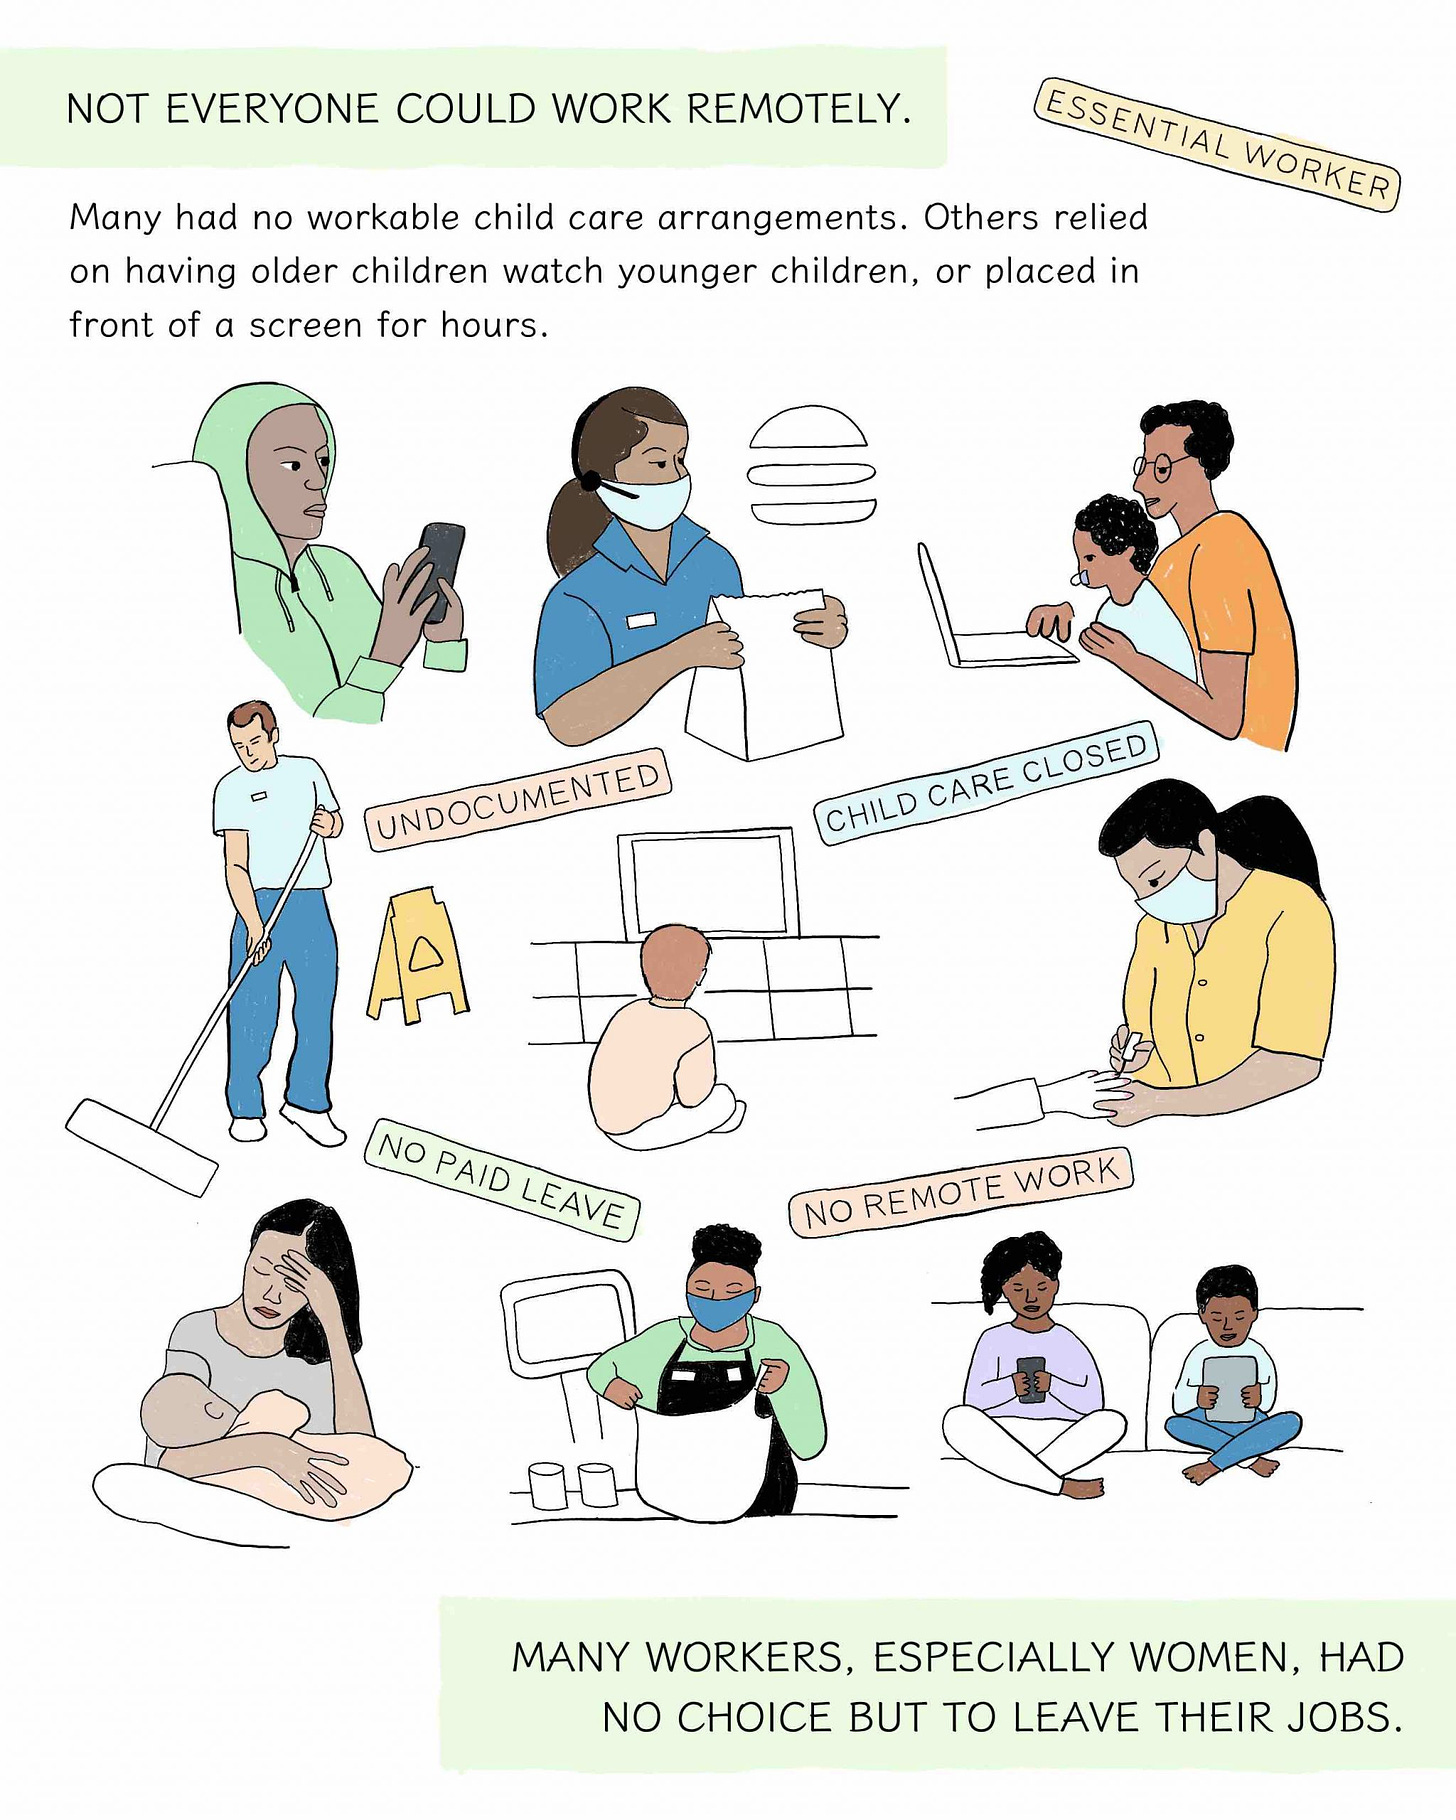 NOT EVERYONE COULD WORK REMOTELY. Many had no workable child care arrangement. Others relied on having older children watch younger children, or placed in front of a screen for hours. MANY WORKERS, ESPECIALLY WOMEN, HAD NO CHOICE BUT TO LEAVE THEIR JOBS. A drawing of the many types of essential workers. 